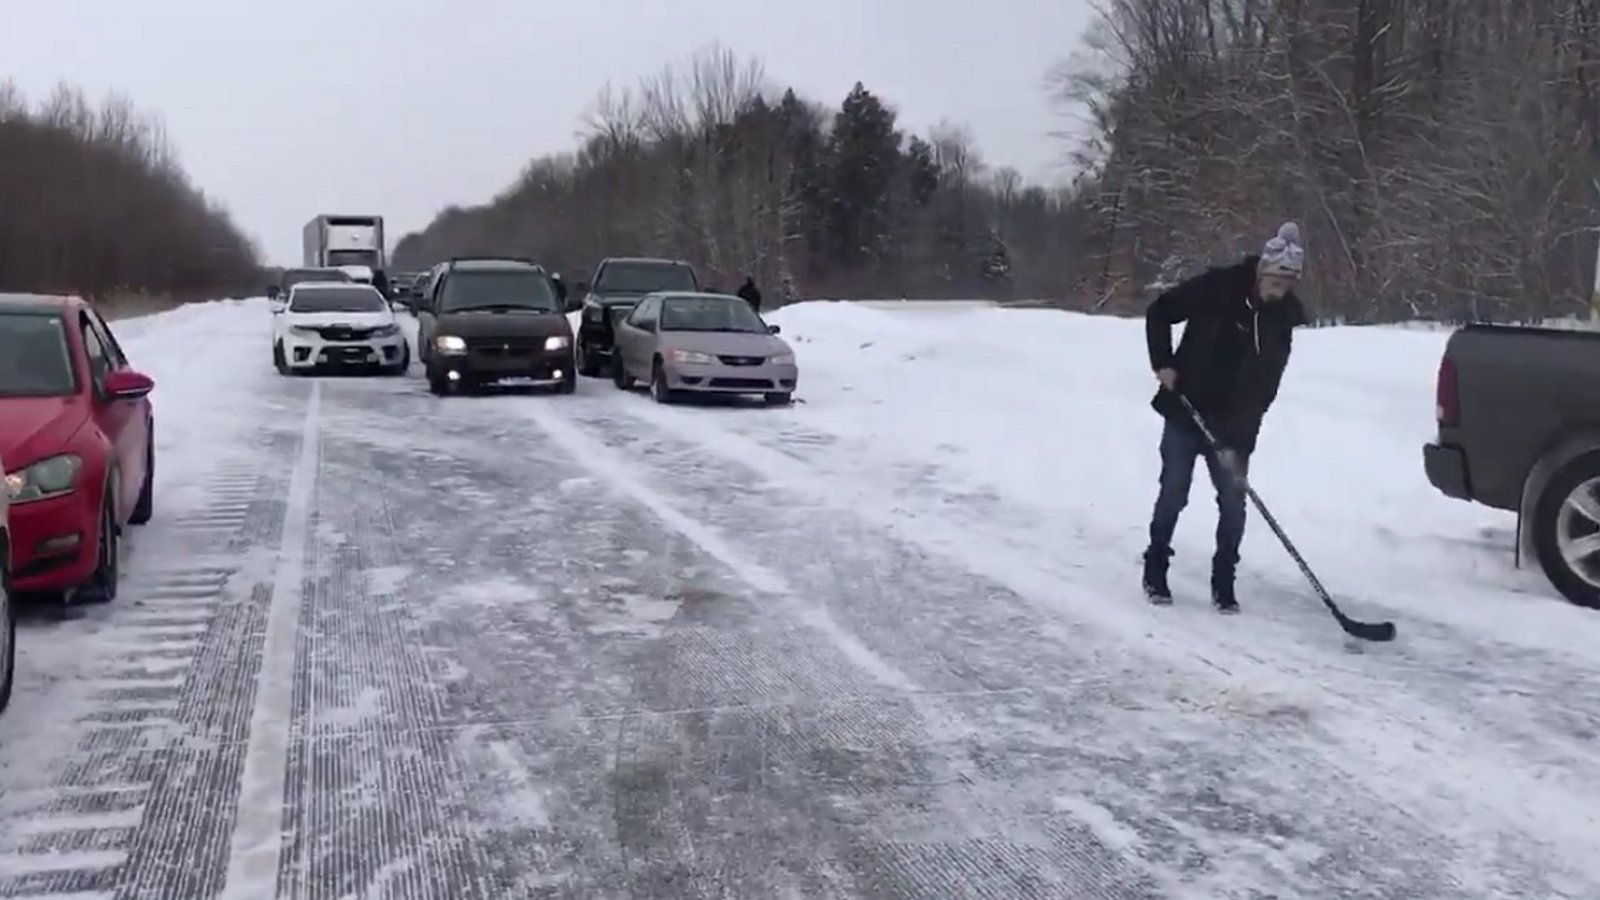 Hockey fans react to major 75 car accident in the most Canadian way ever!